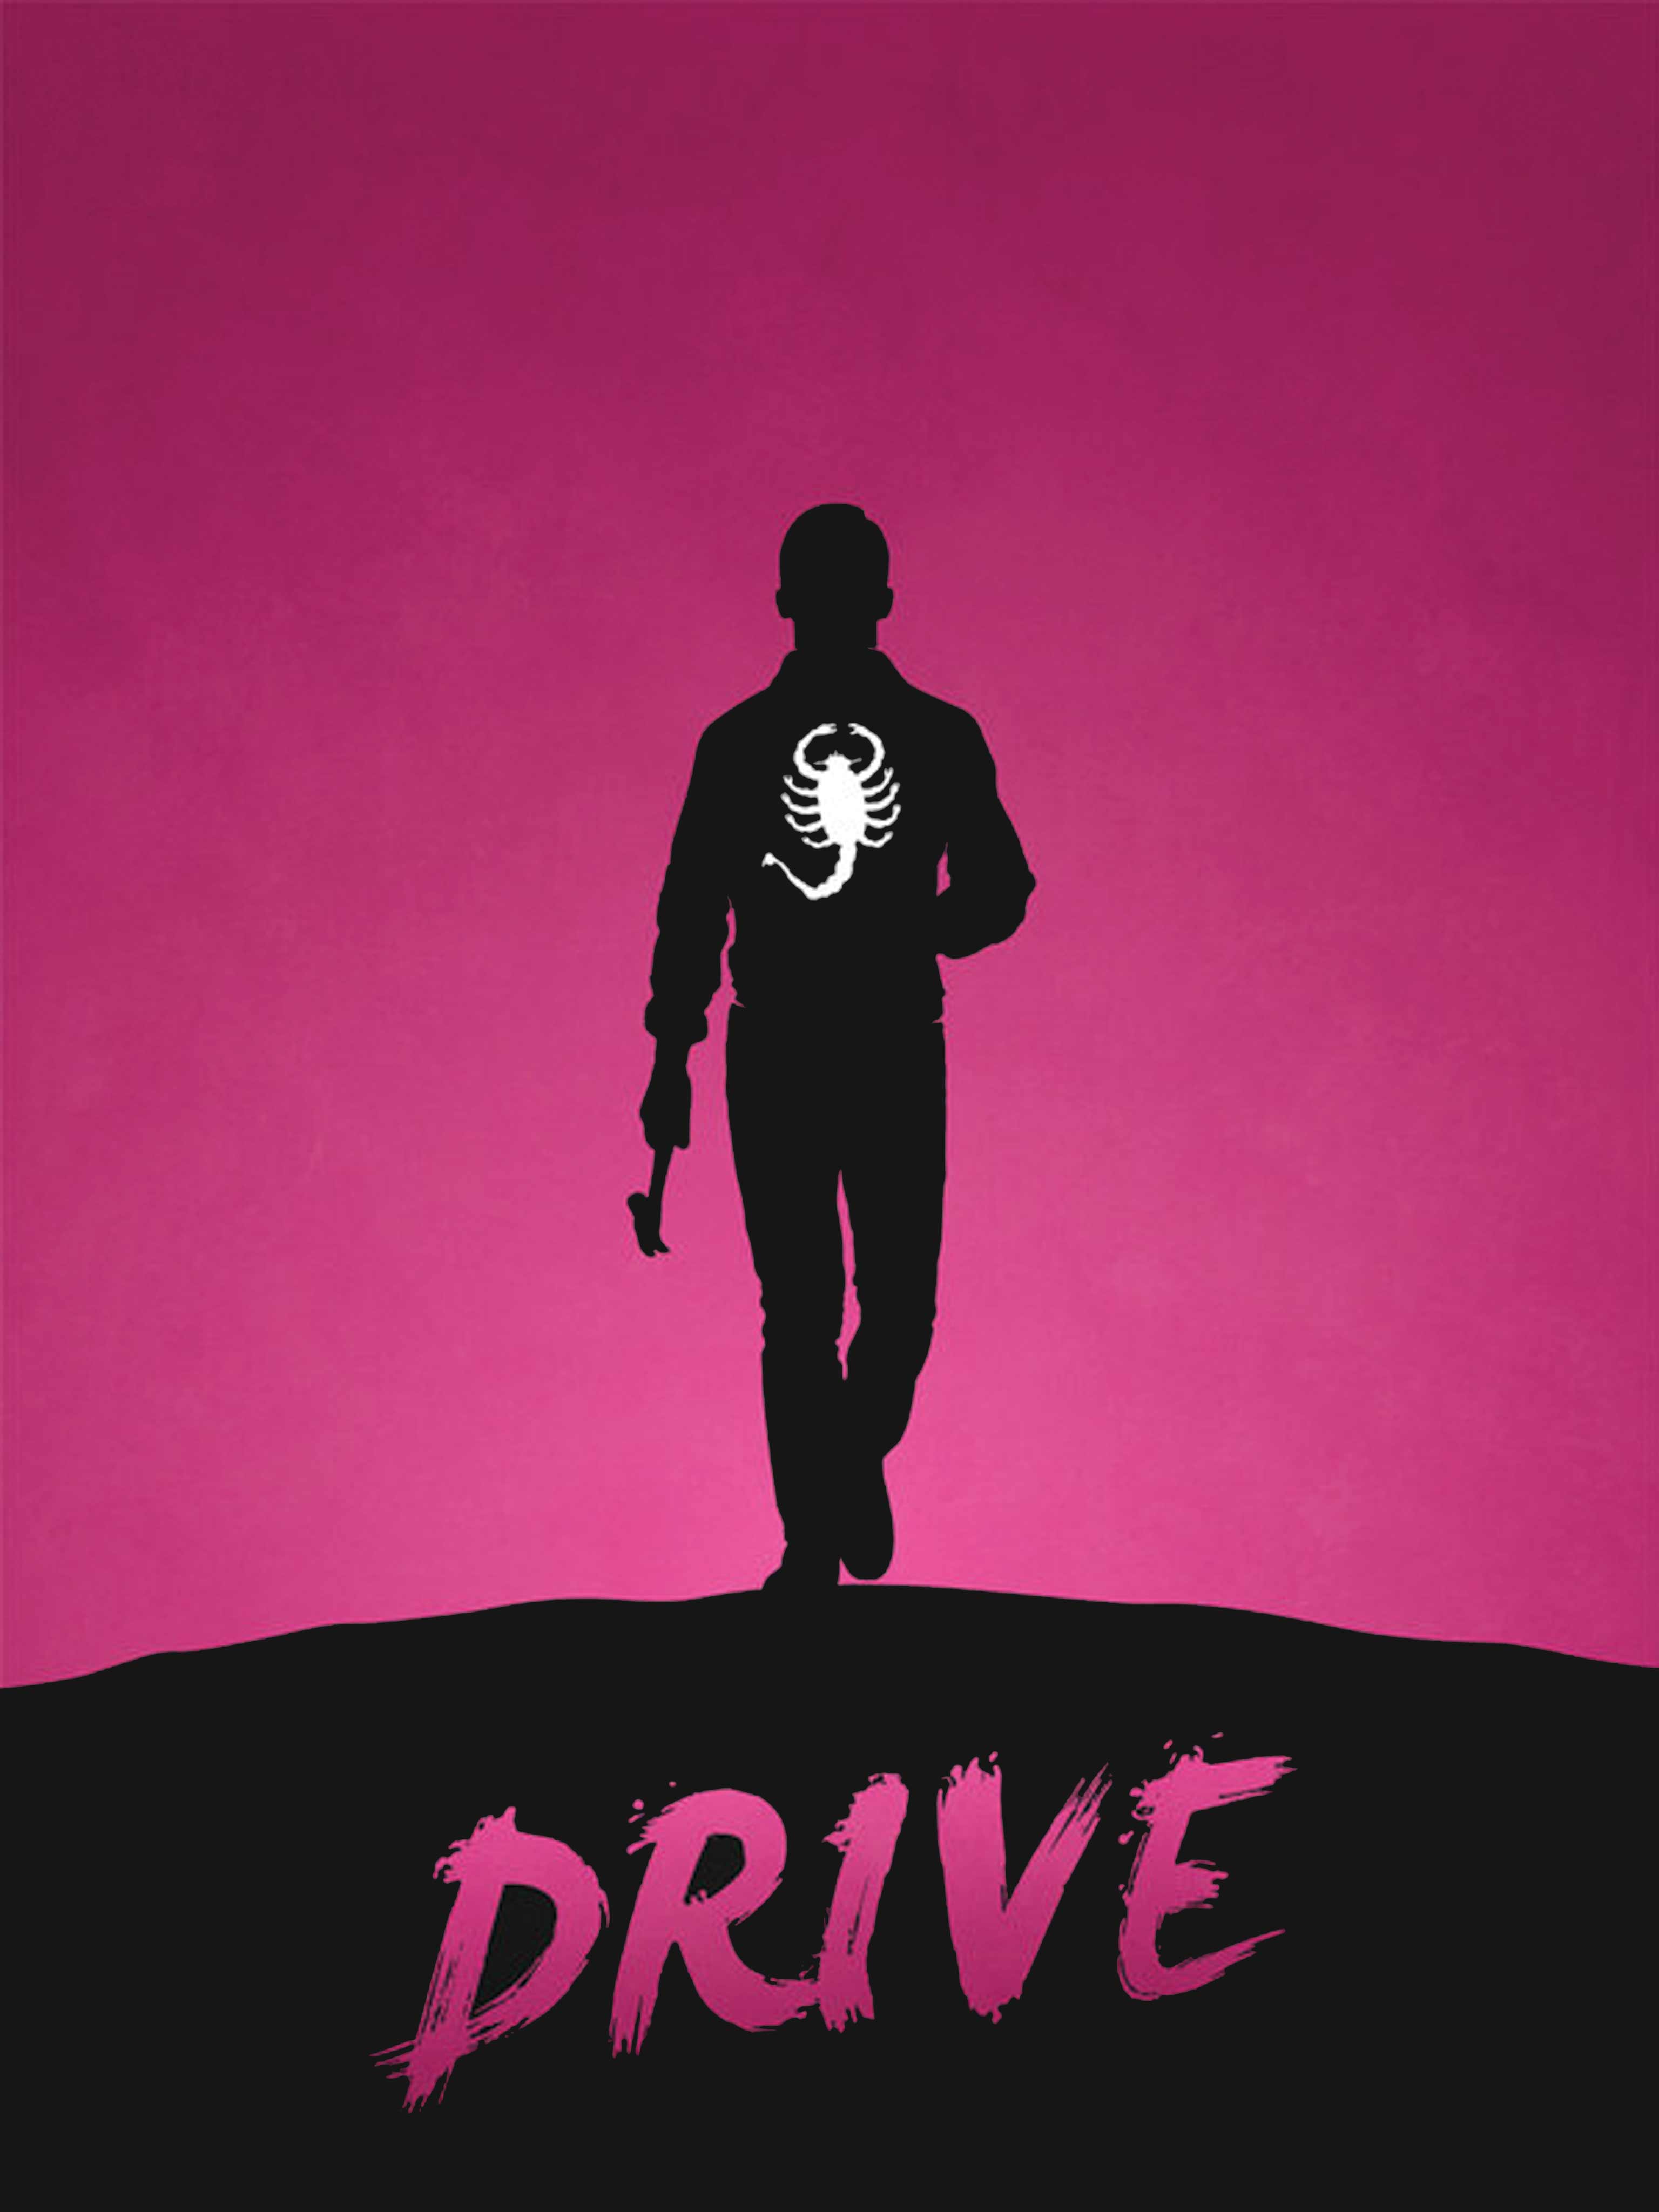 Download For Ios - Drive Wallpaper Hd , HD Wallpaper & Backgrounds